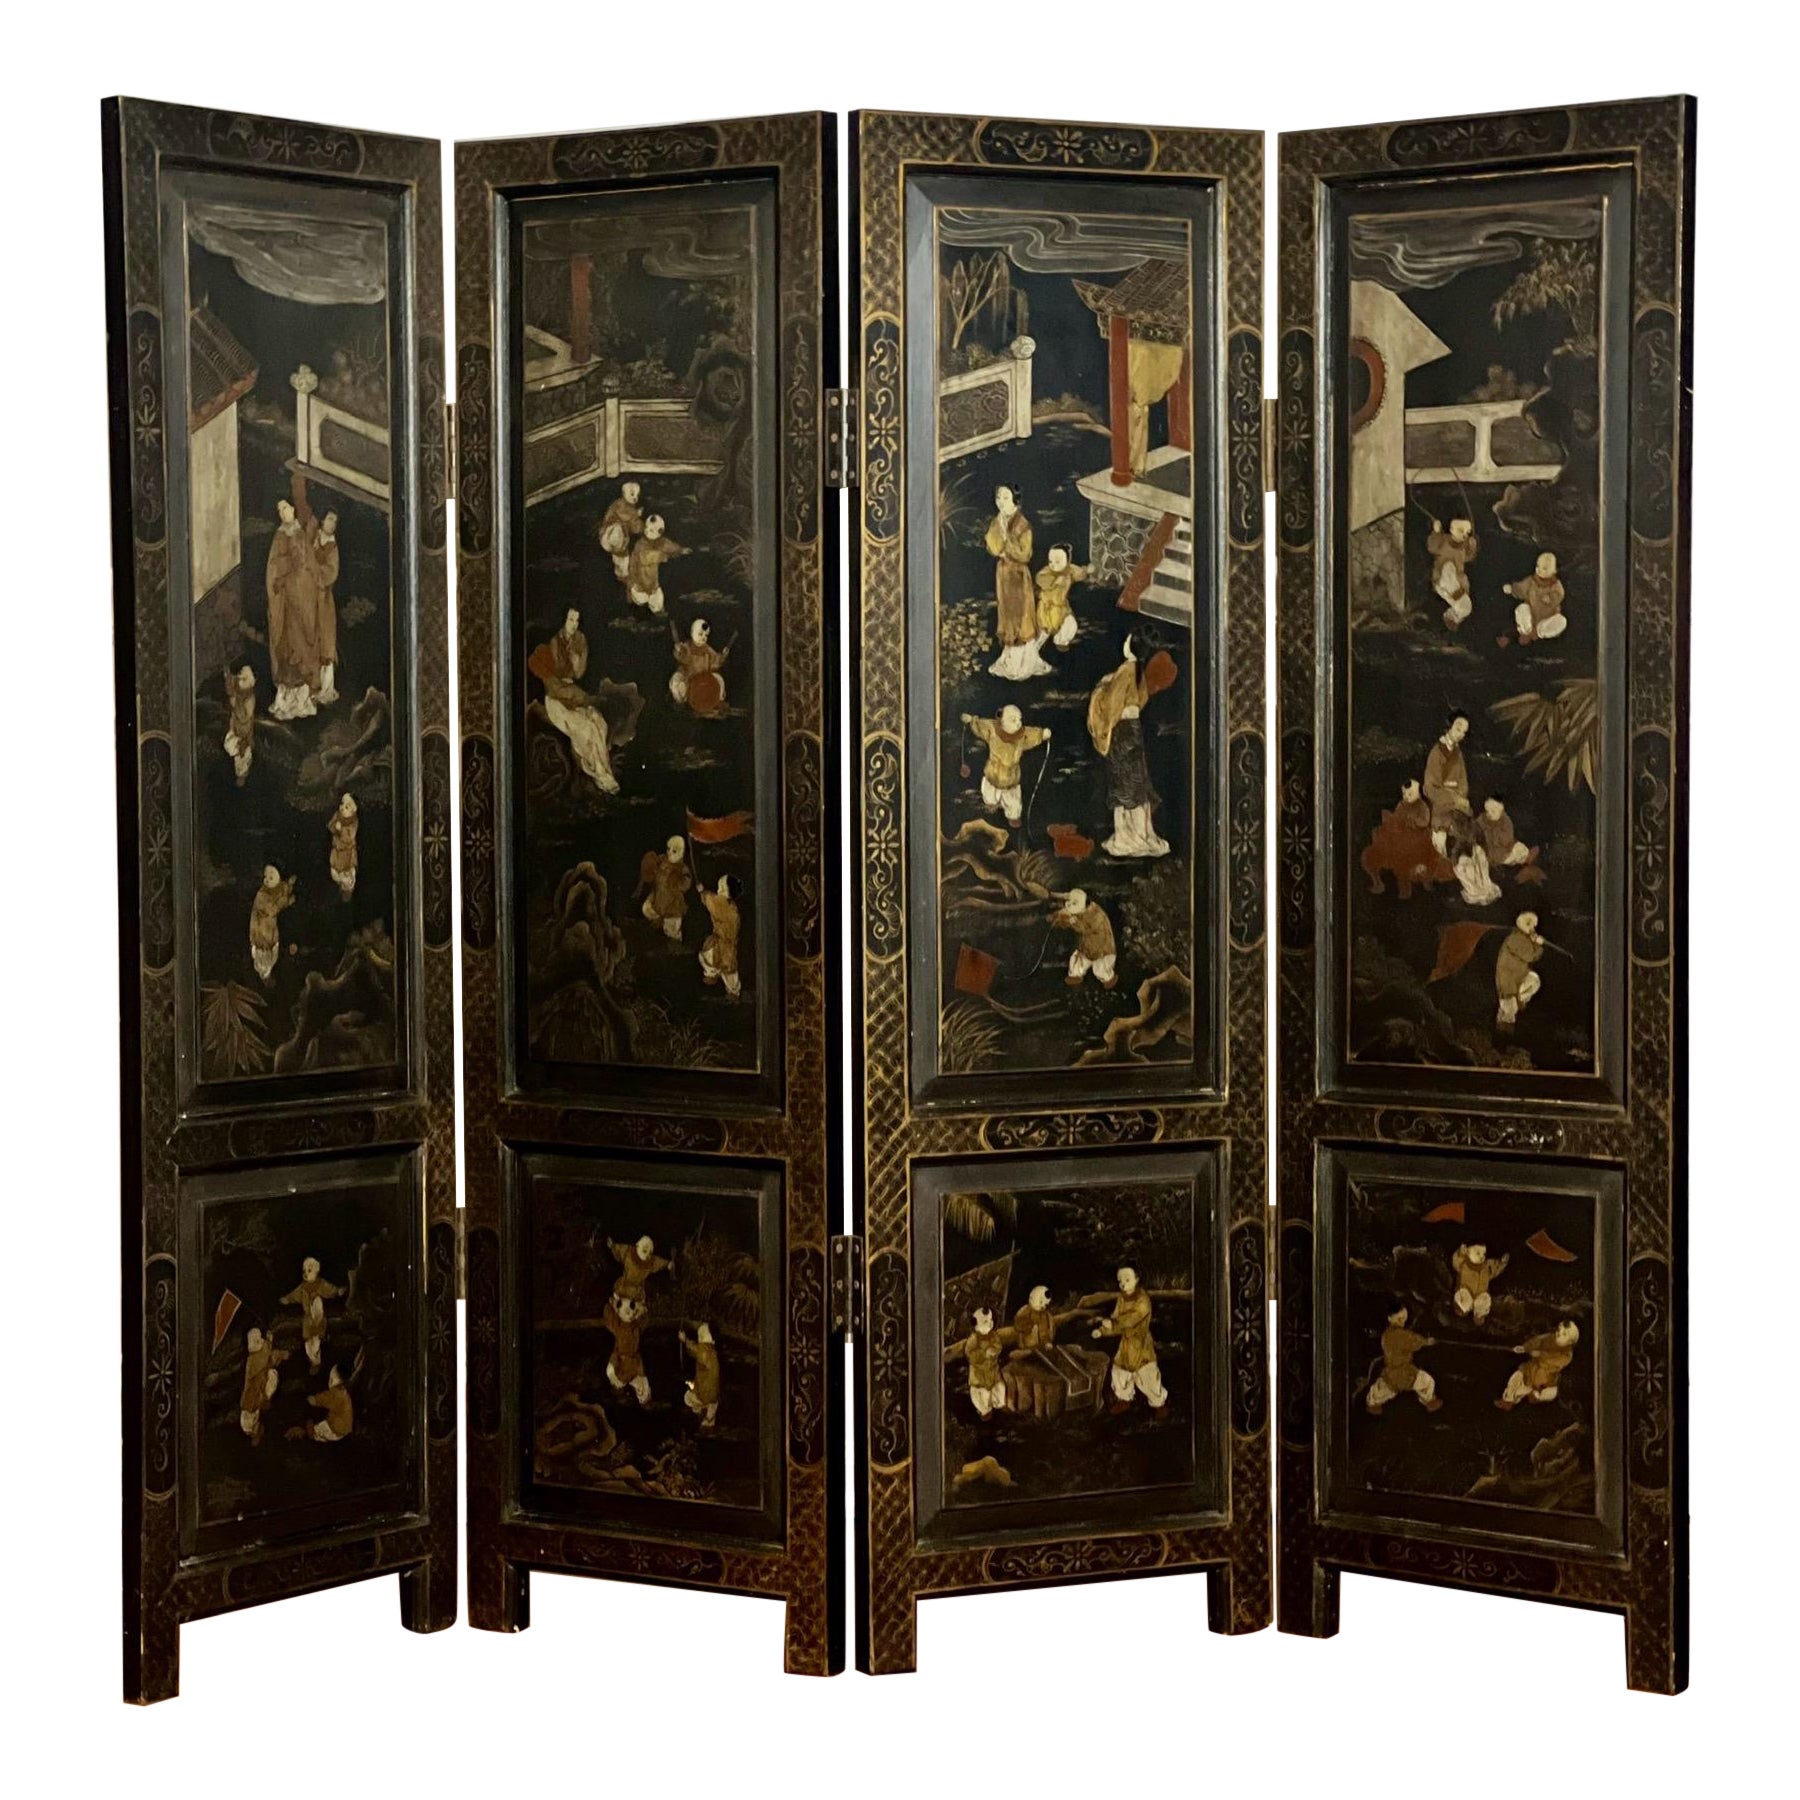 Chinese Export Four Panel Lacquered Coromandel Dressing Screen Room Divider